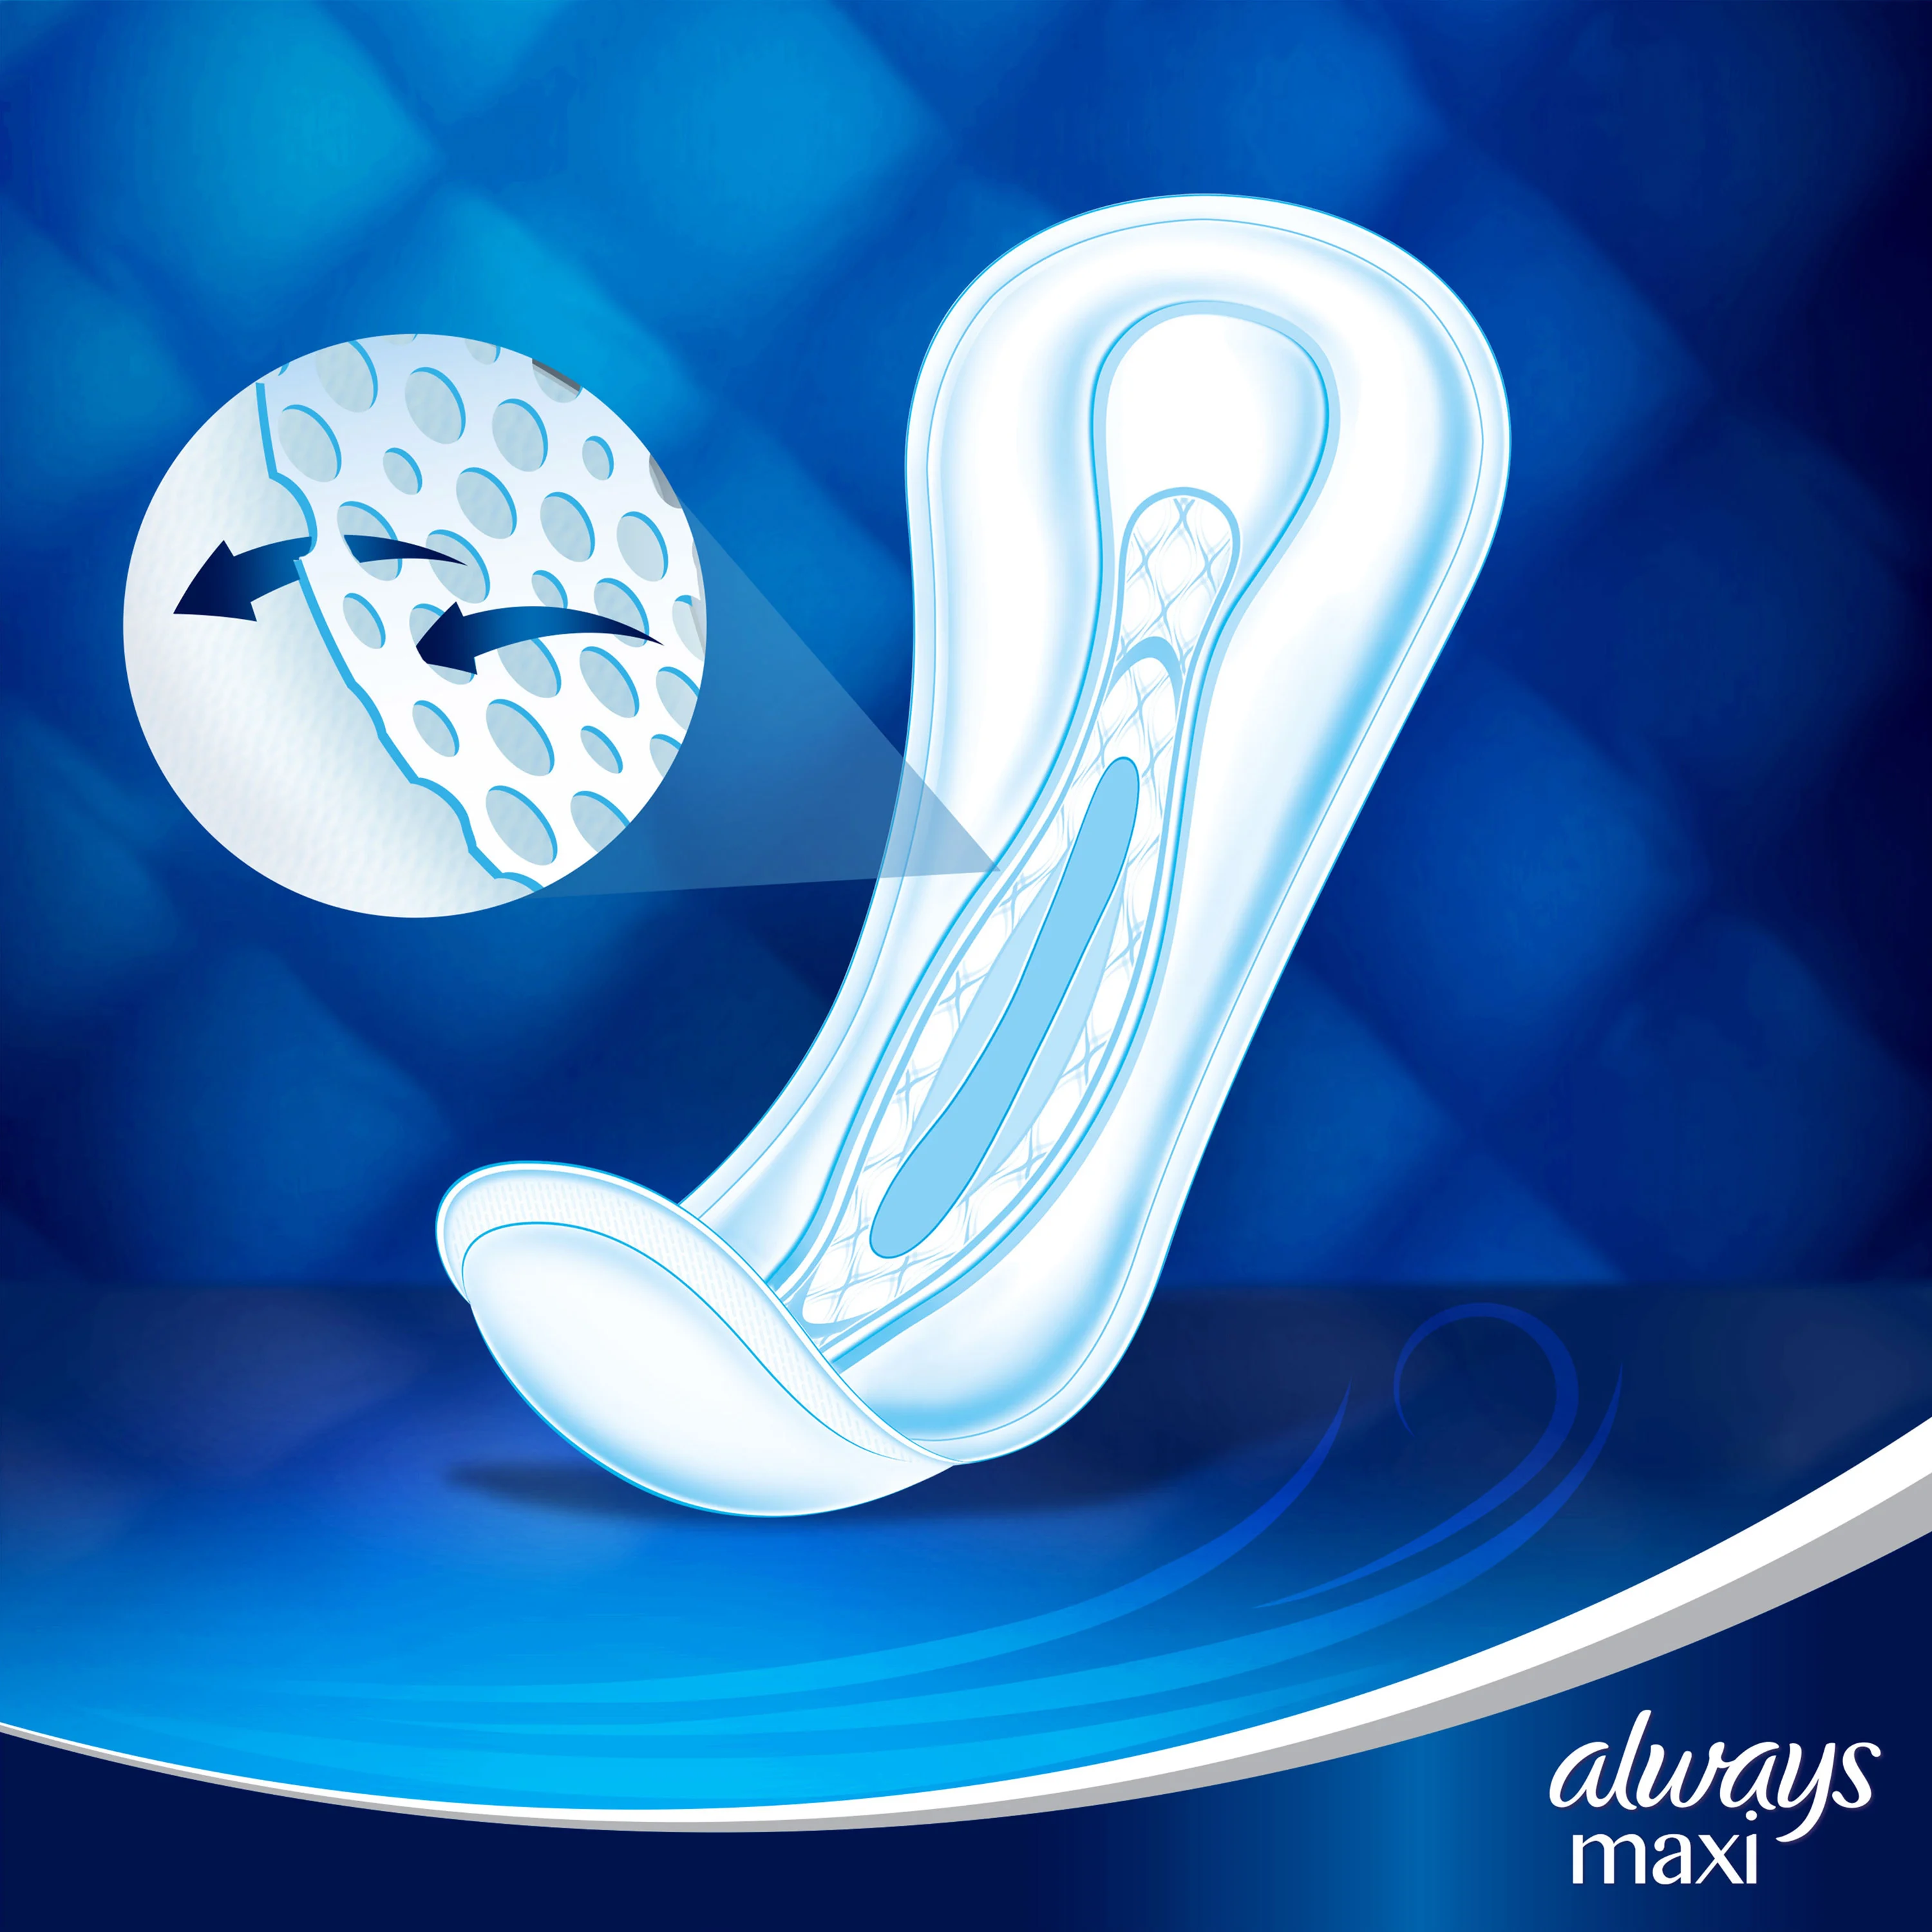 Super absorbent Always Maxi sanitary towels